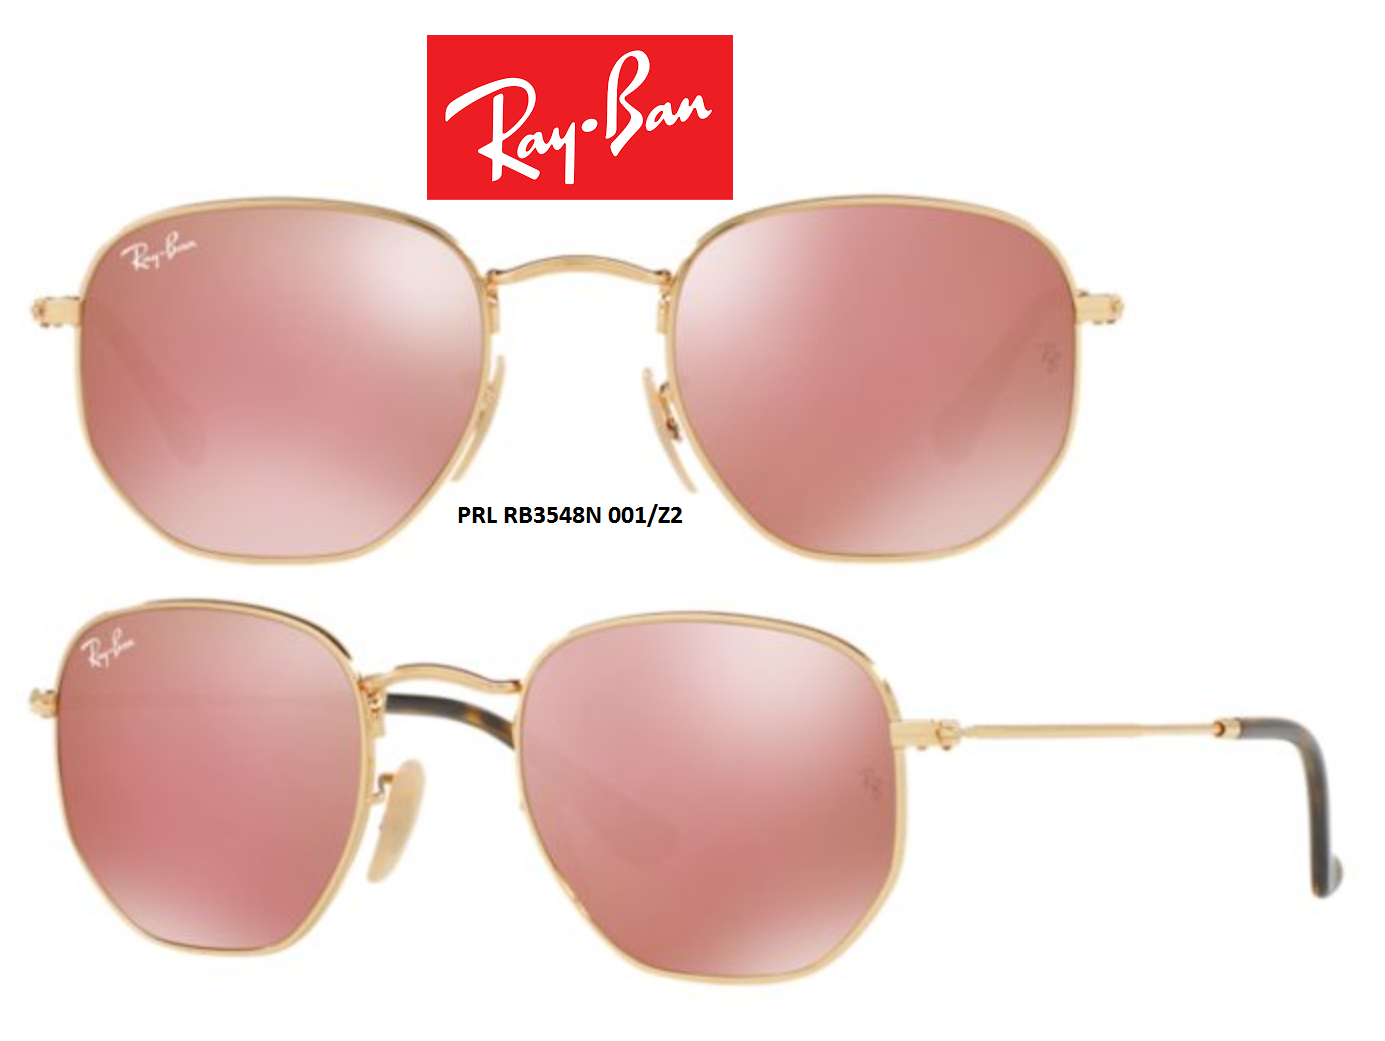 Ray Ban Sunglasses Rb3548n Hexagonal Flat Lenses Multiple Colors Available 124 99 Picclick